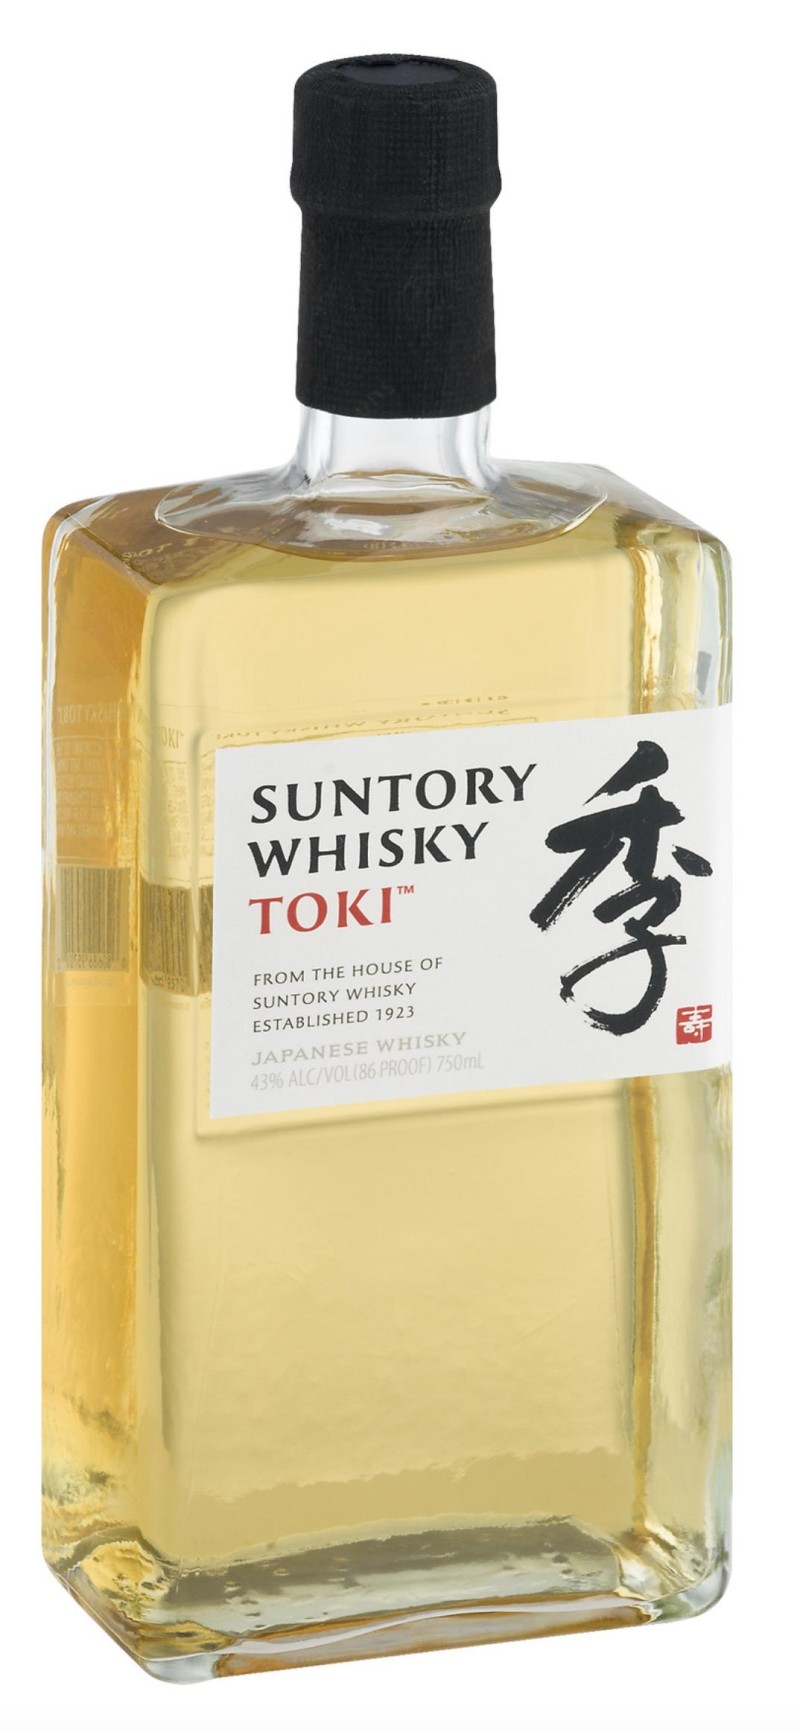 Japanese and Whisky-TOKI vintages des - 43% Clos Rare great - - Millésimes SUNTORY wines